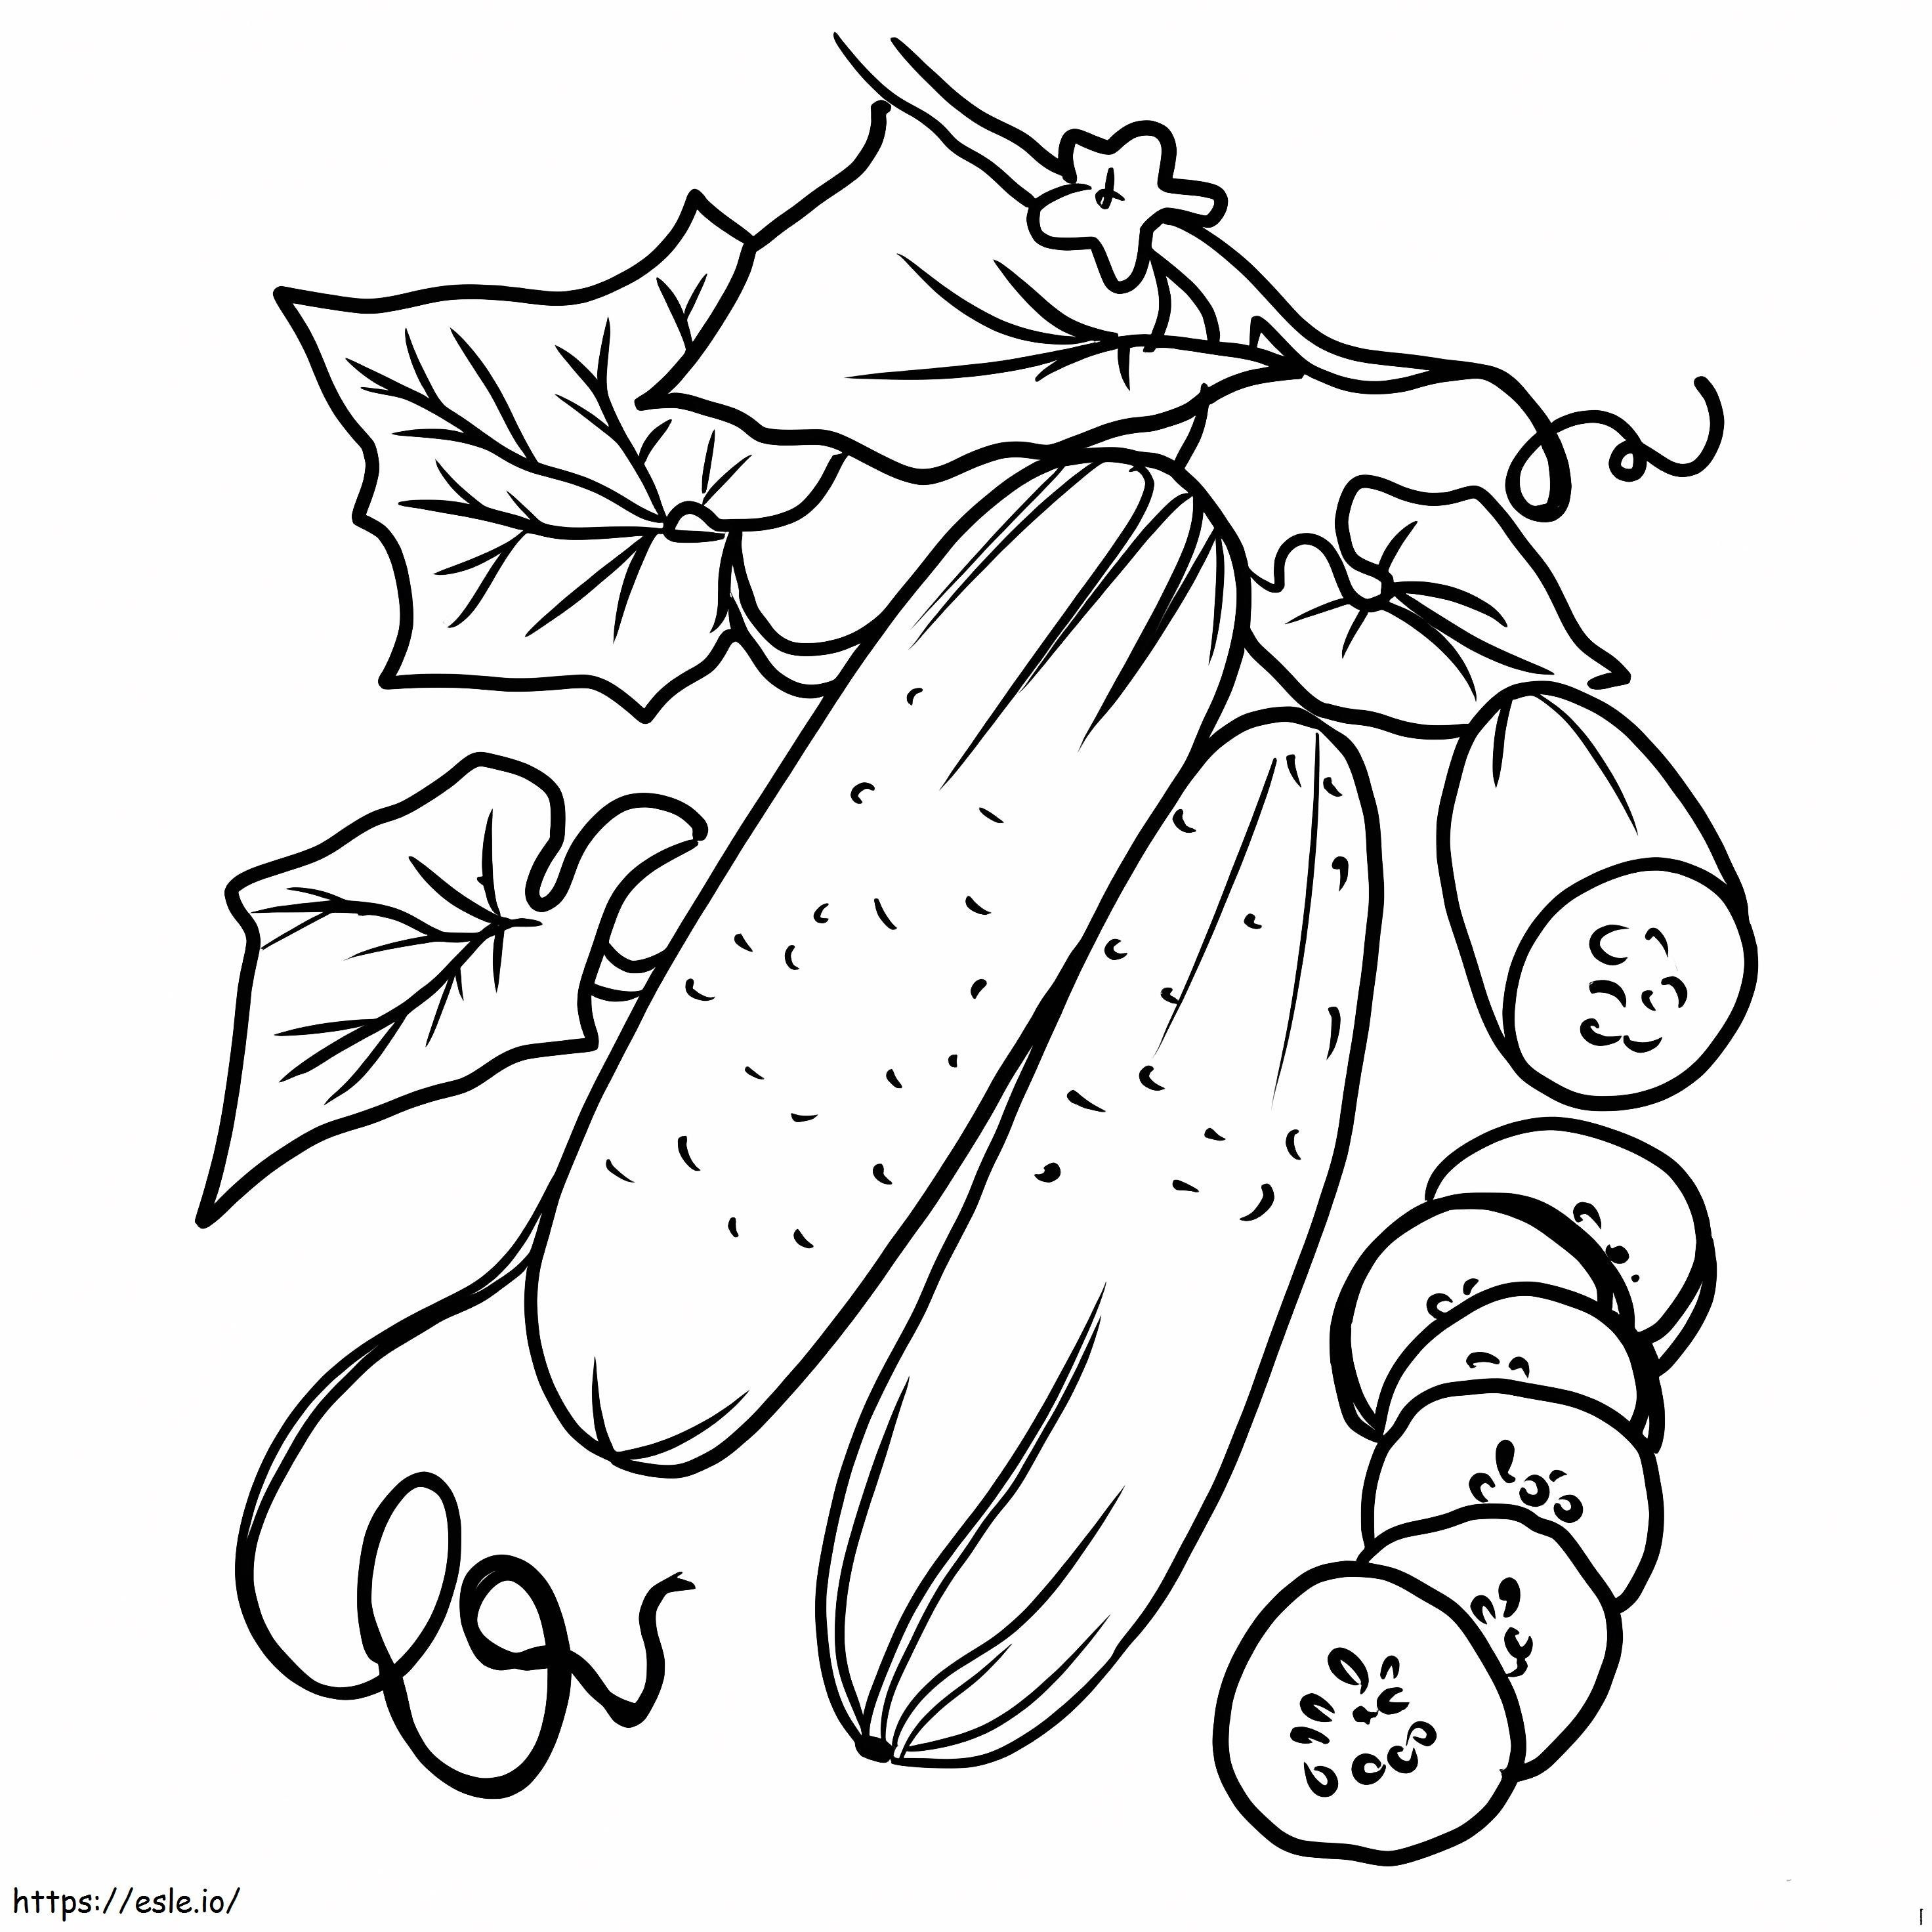 Awesome Cucumber coloring page